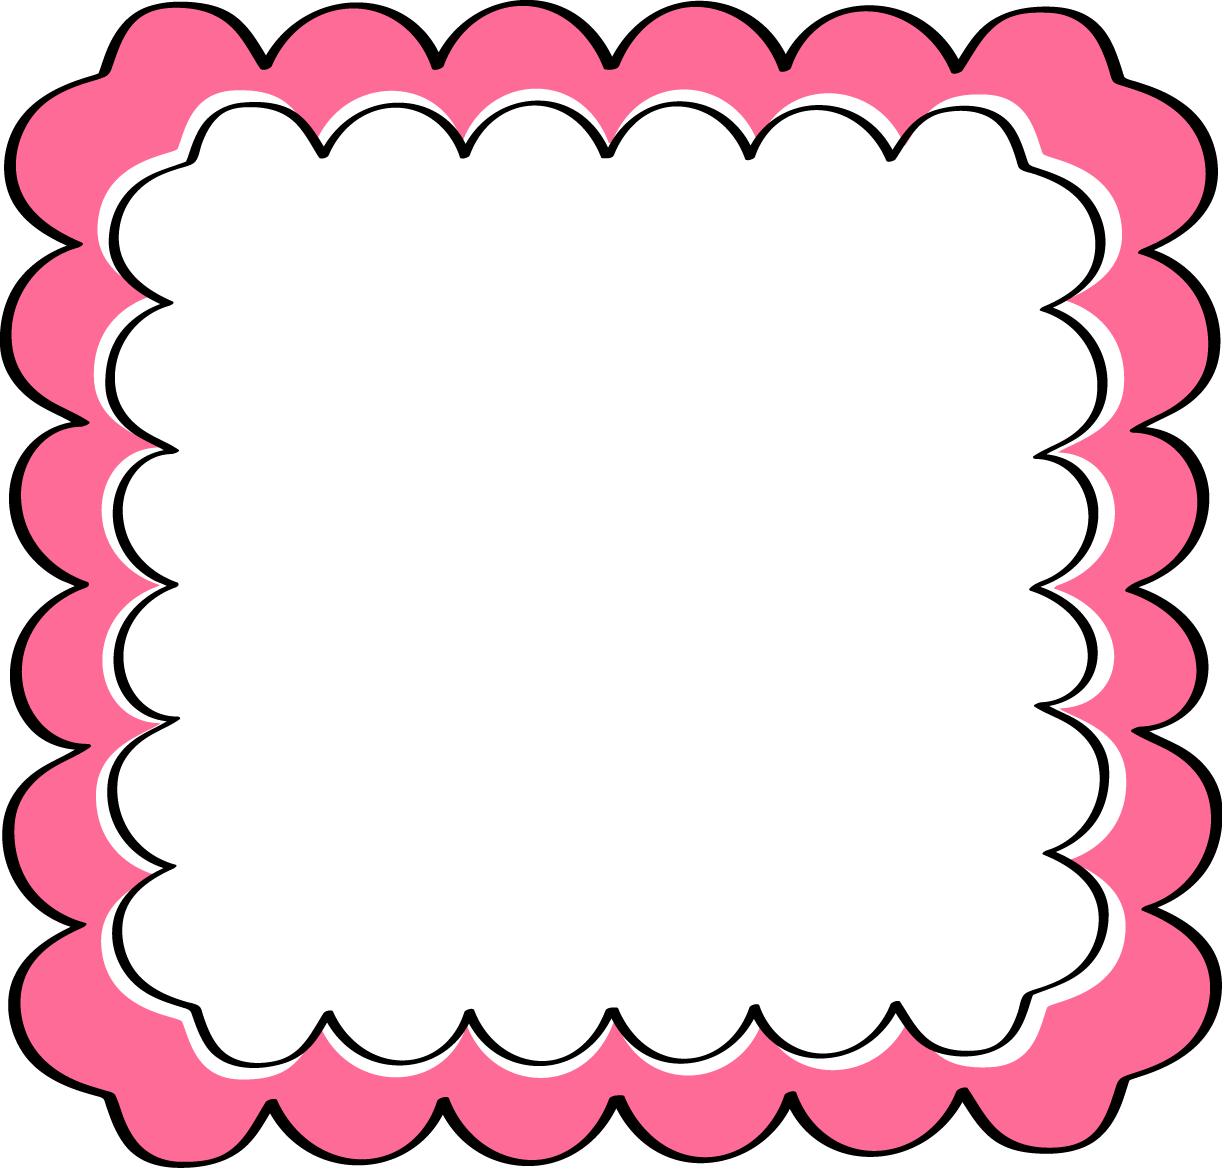 clip art frames for pictures - photo #14